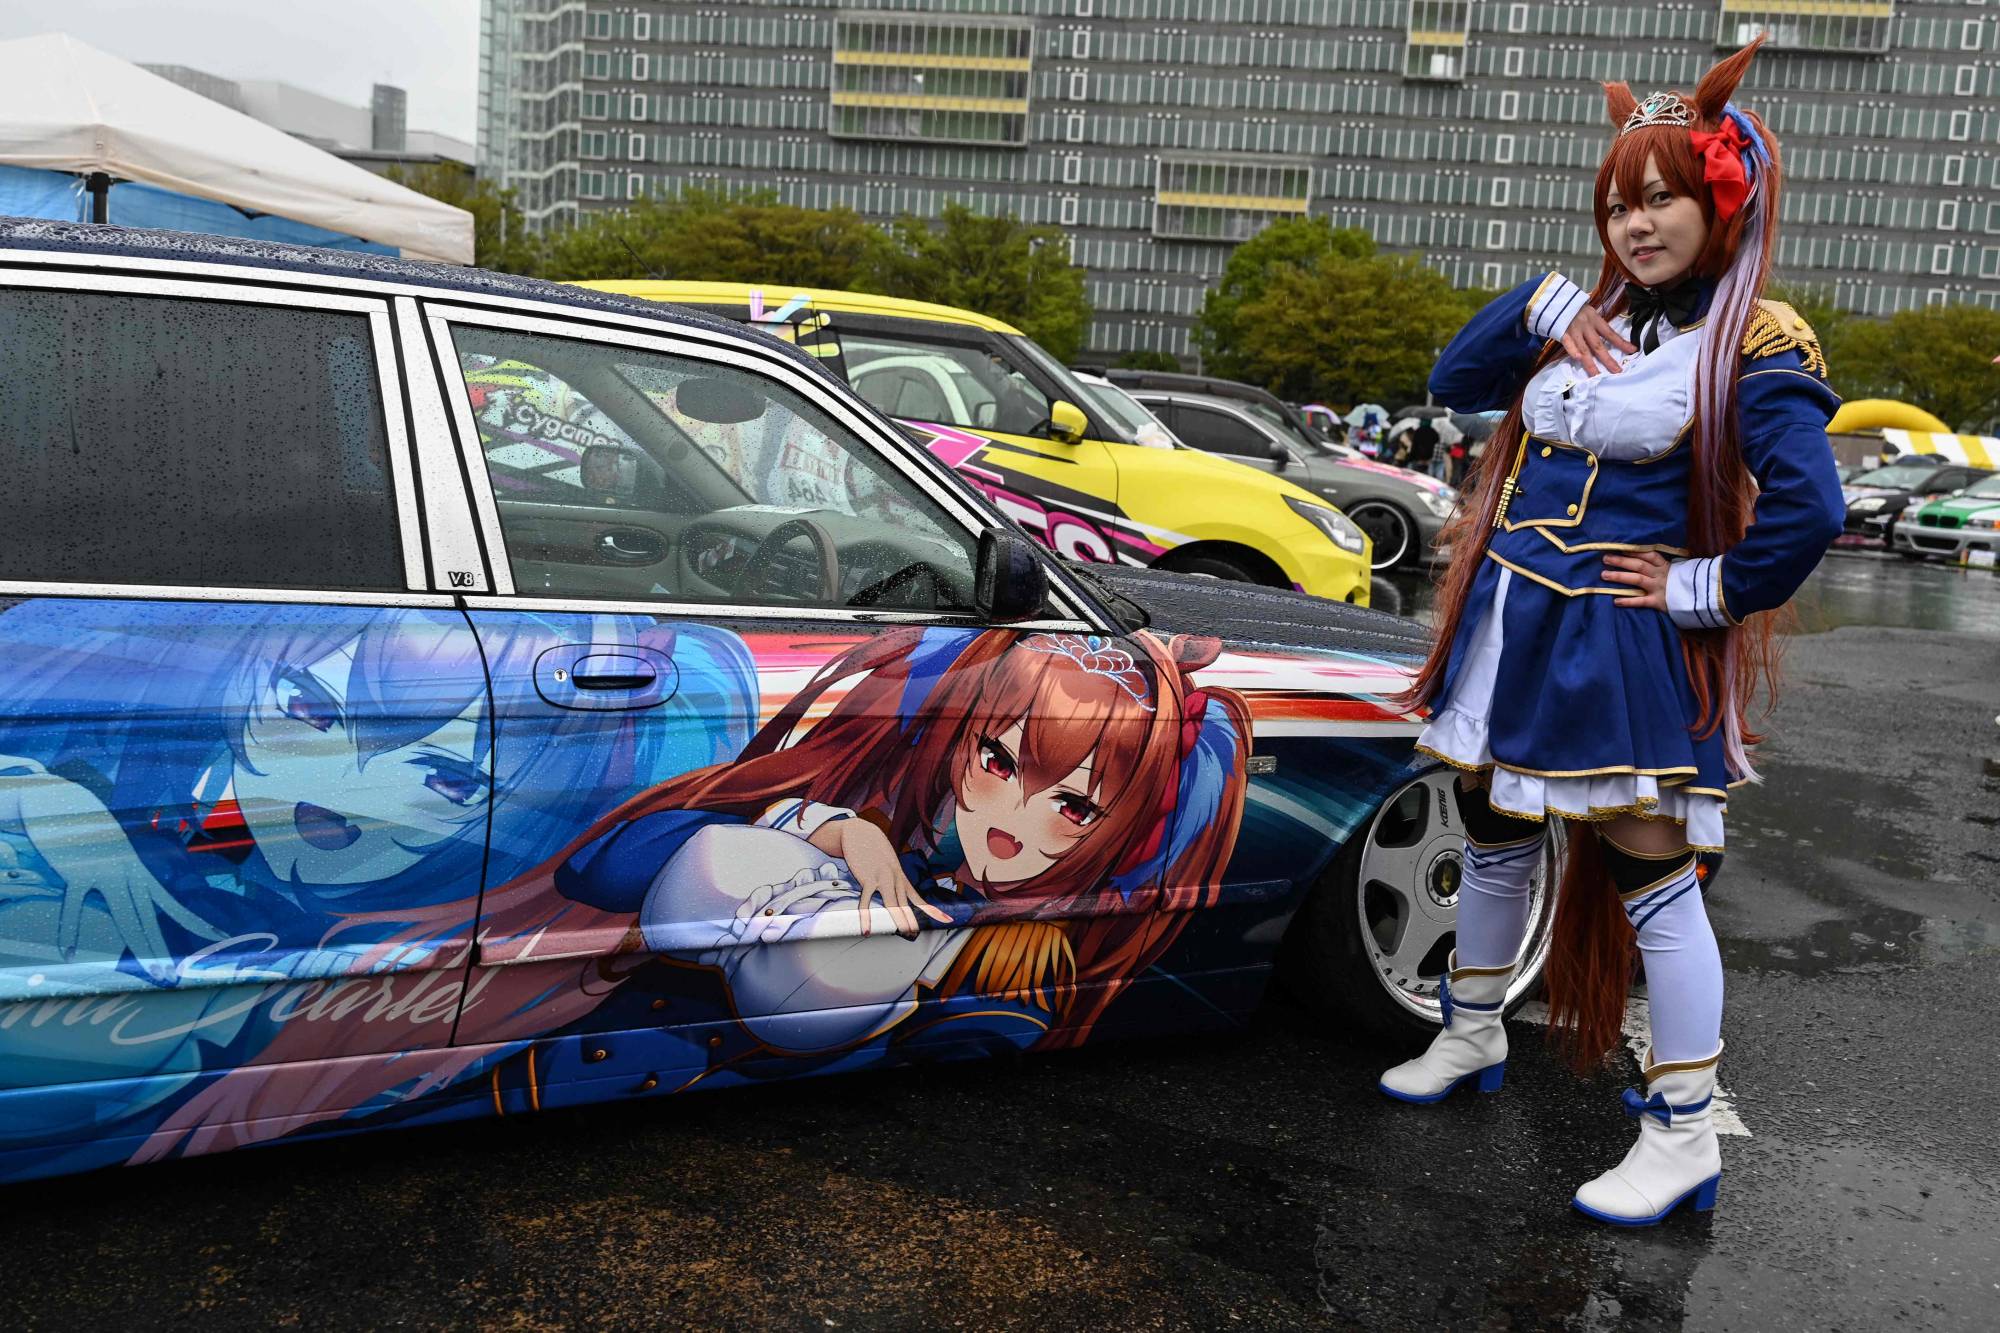 AnimeNEXT on Twitter AnimeNEXT is excited to introduce the Anime Car Show  Well have a showcase of replica vehicles inspired by Japanese anime and  manga We will also have Itasha vehicles decorated